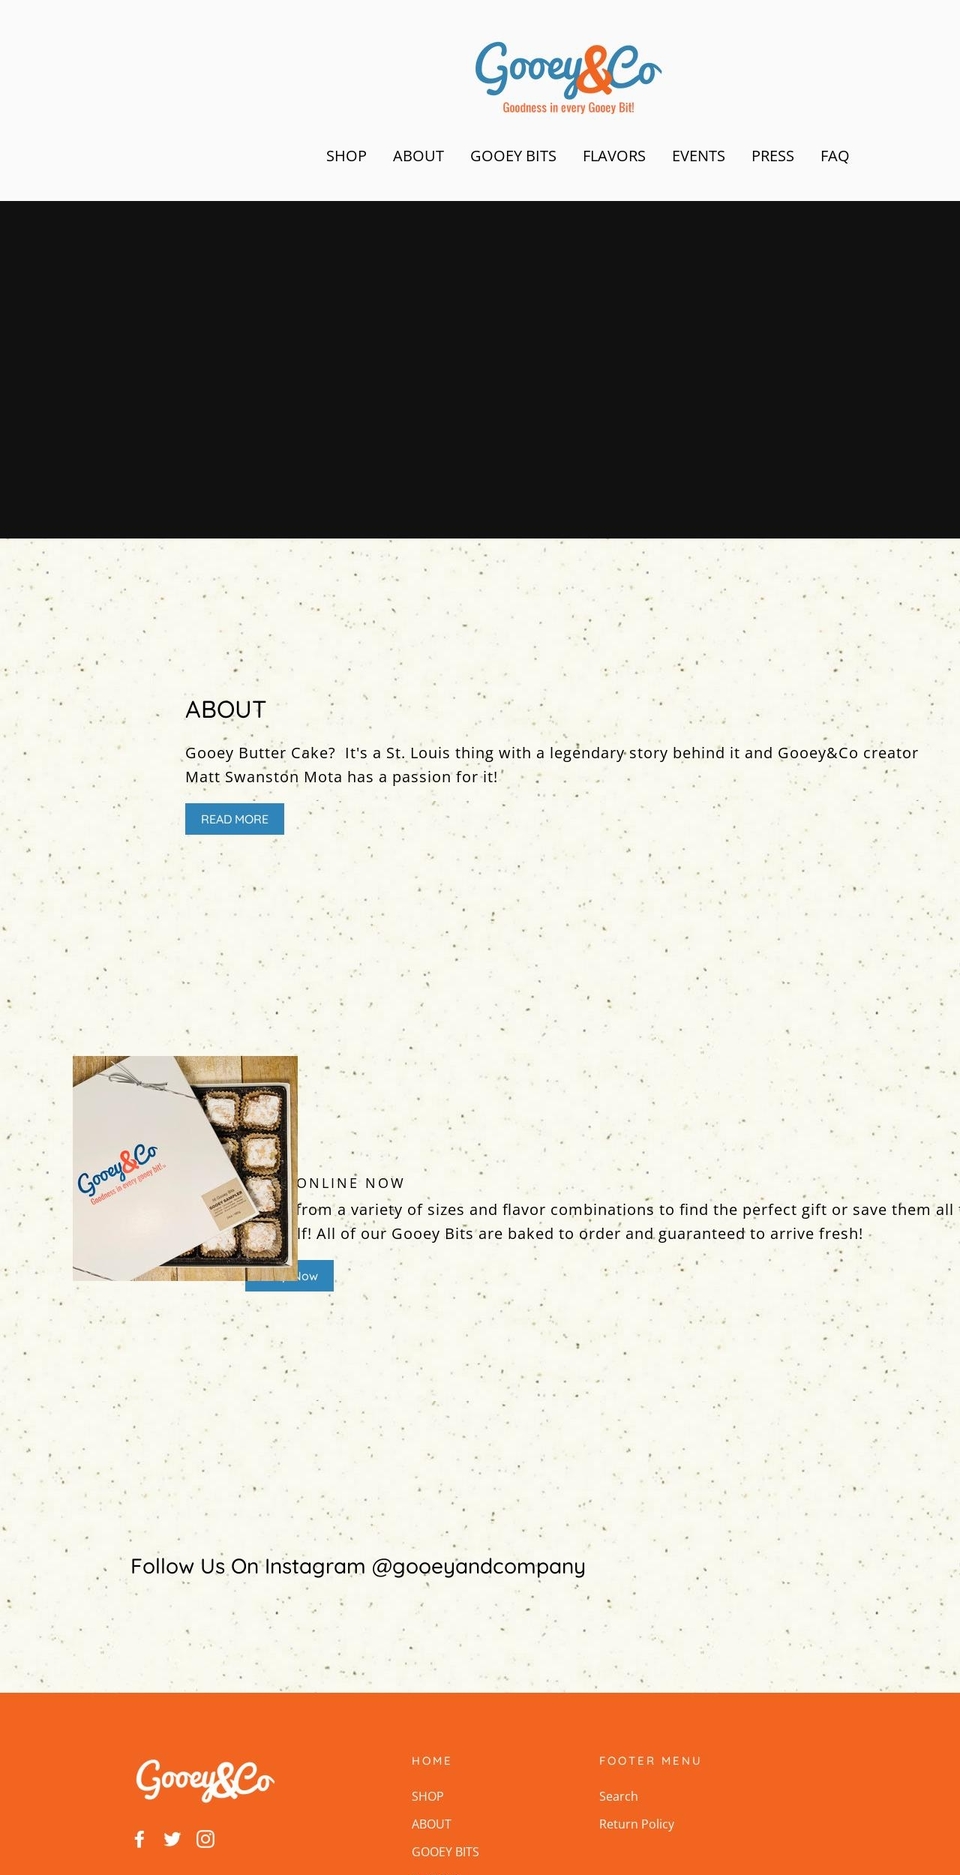 Gifts Shopify theme site example gooeyandco.com